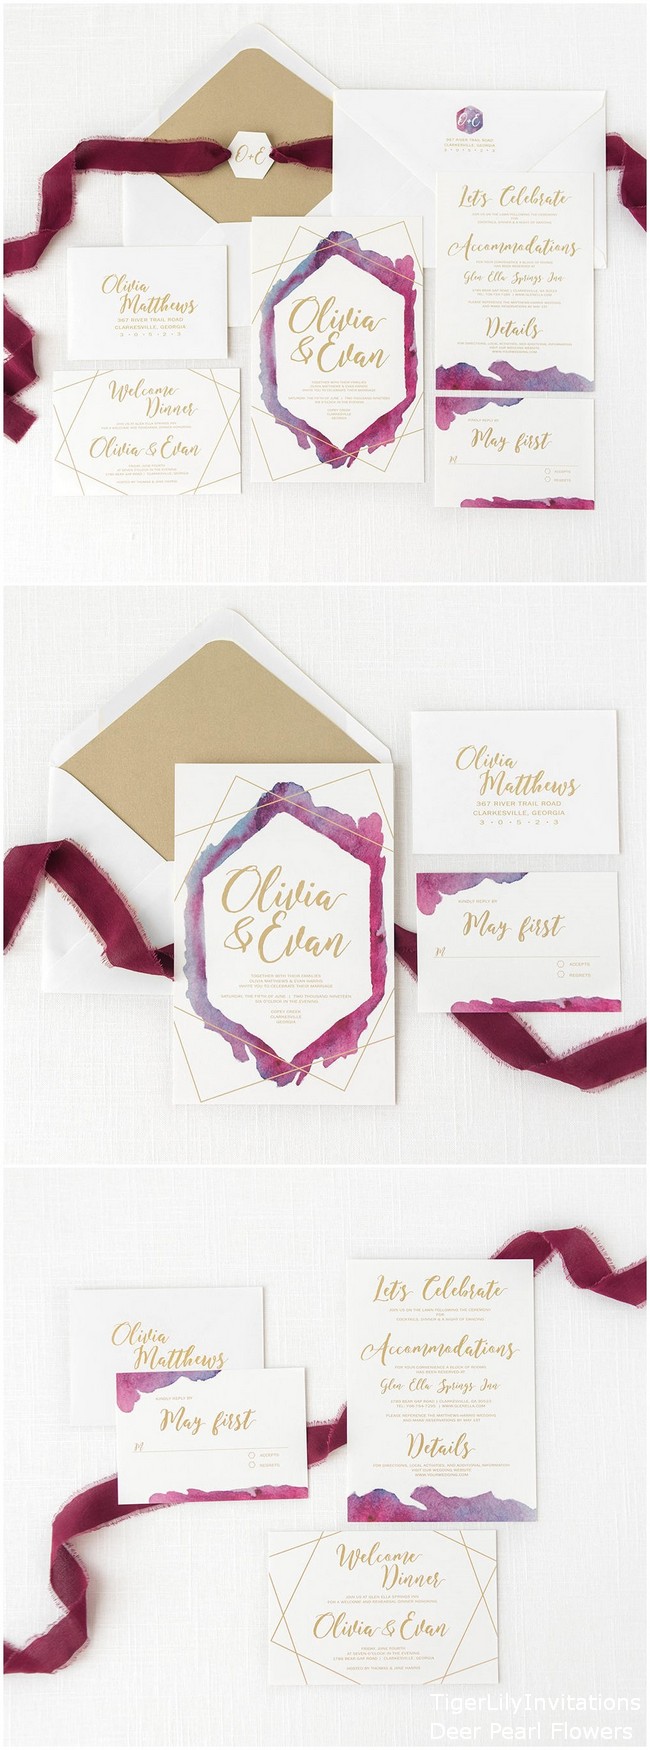 Geometric Watercolor Wedding Invitation with Gold Envelope Liners